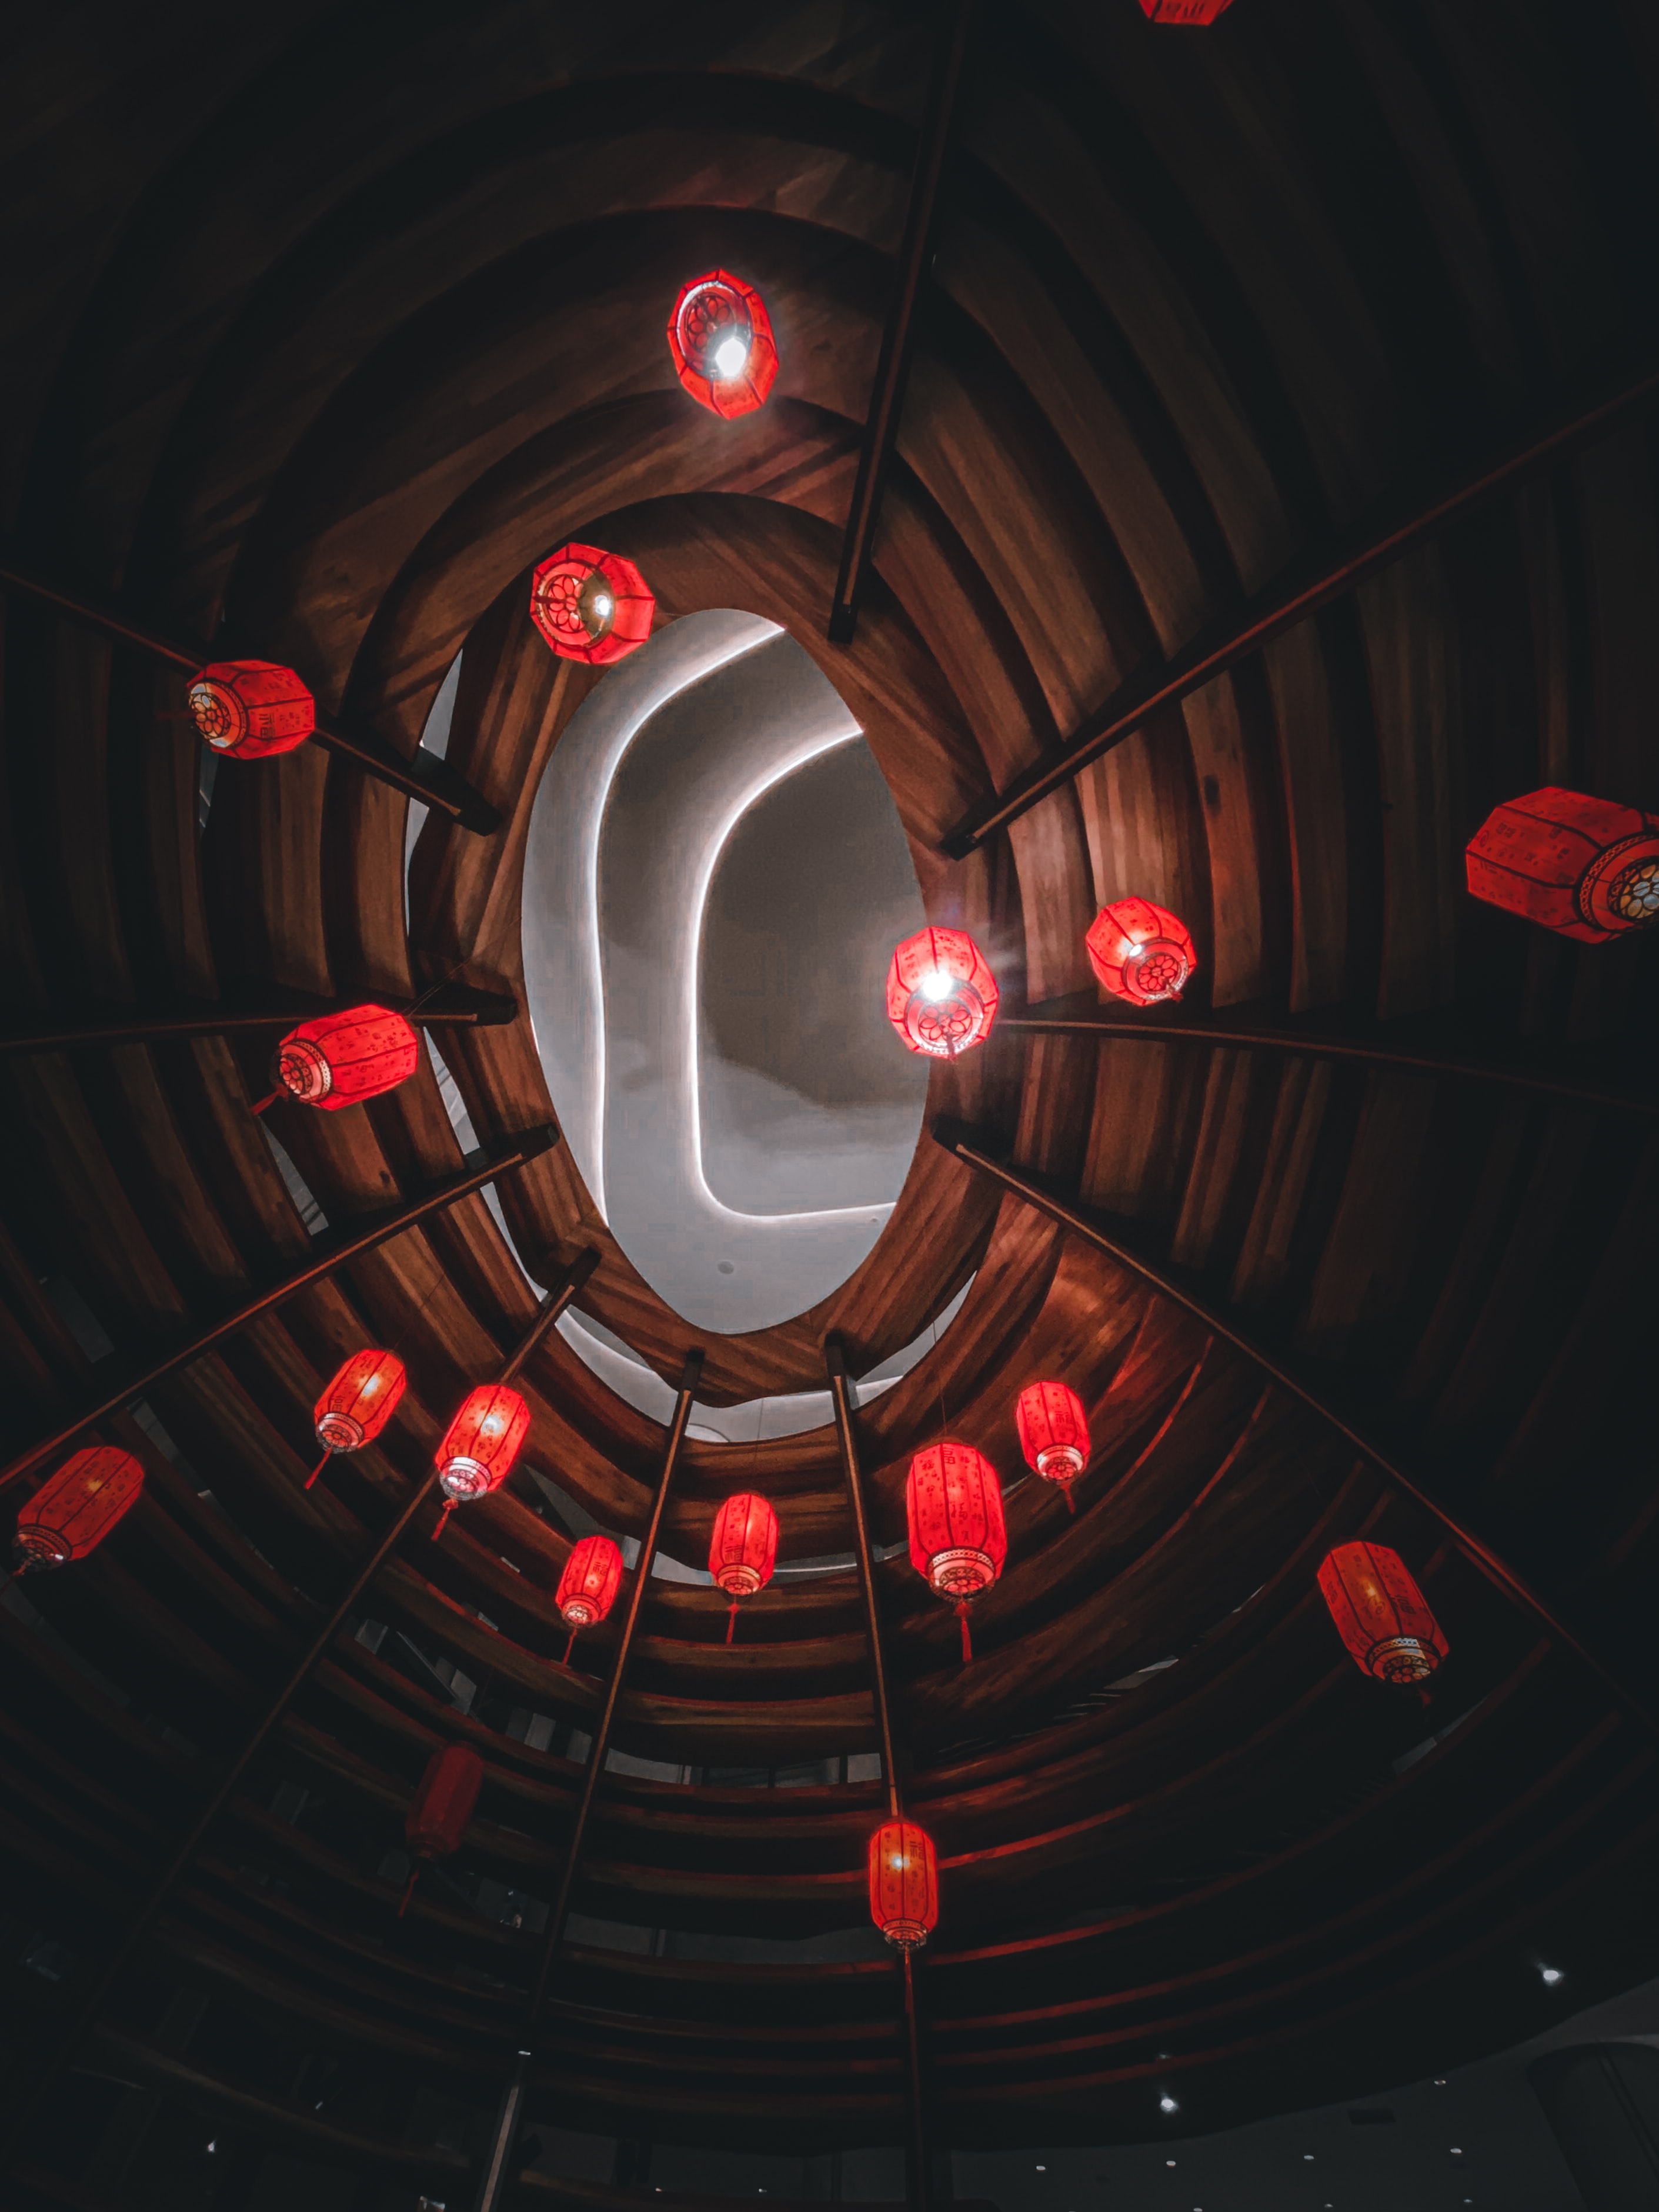 lights, tunnel, red, building, miscellanea, miscellaneous, lanterns High Definition image